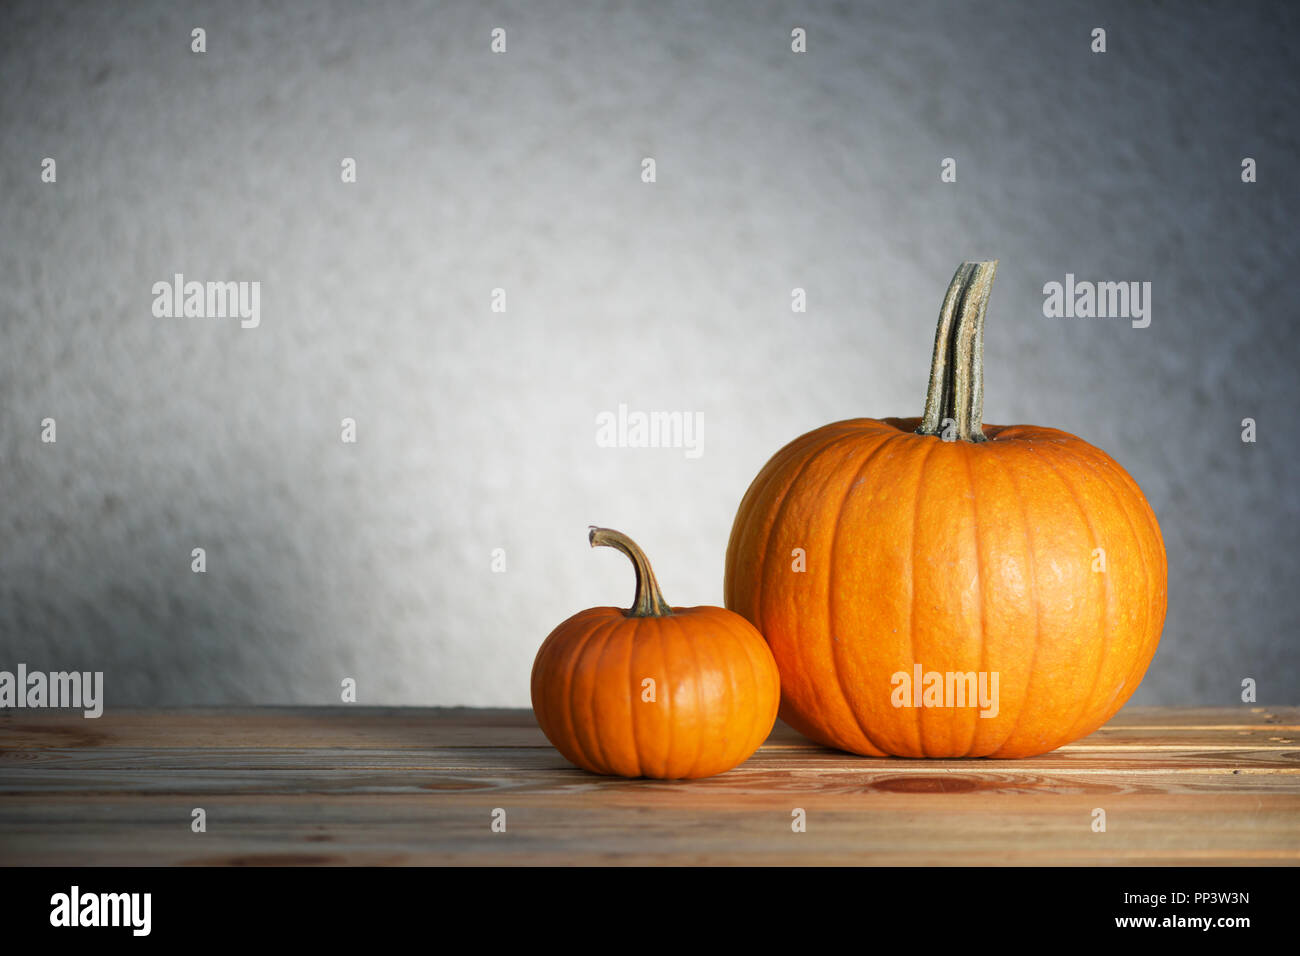 Two pumpkins on wooden table. Halloween and autumn food background Stock Photo